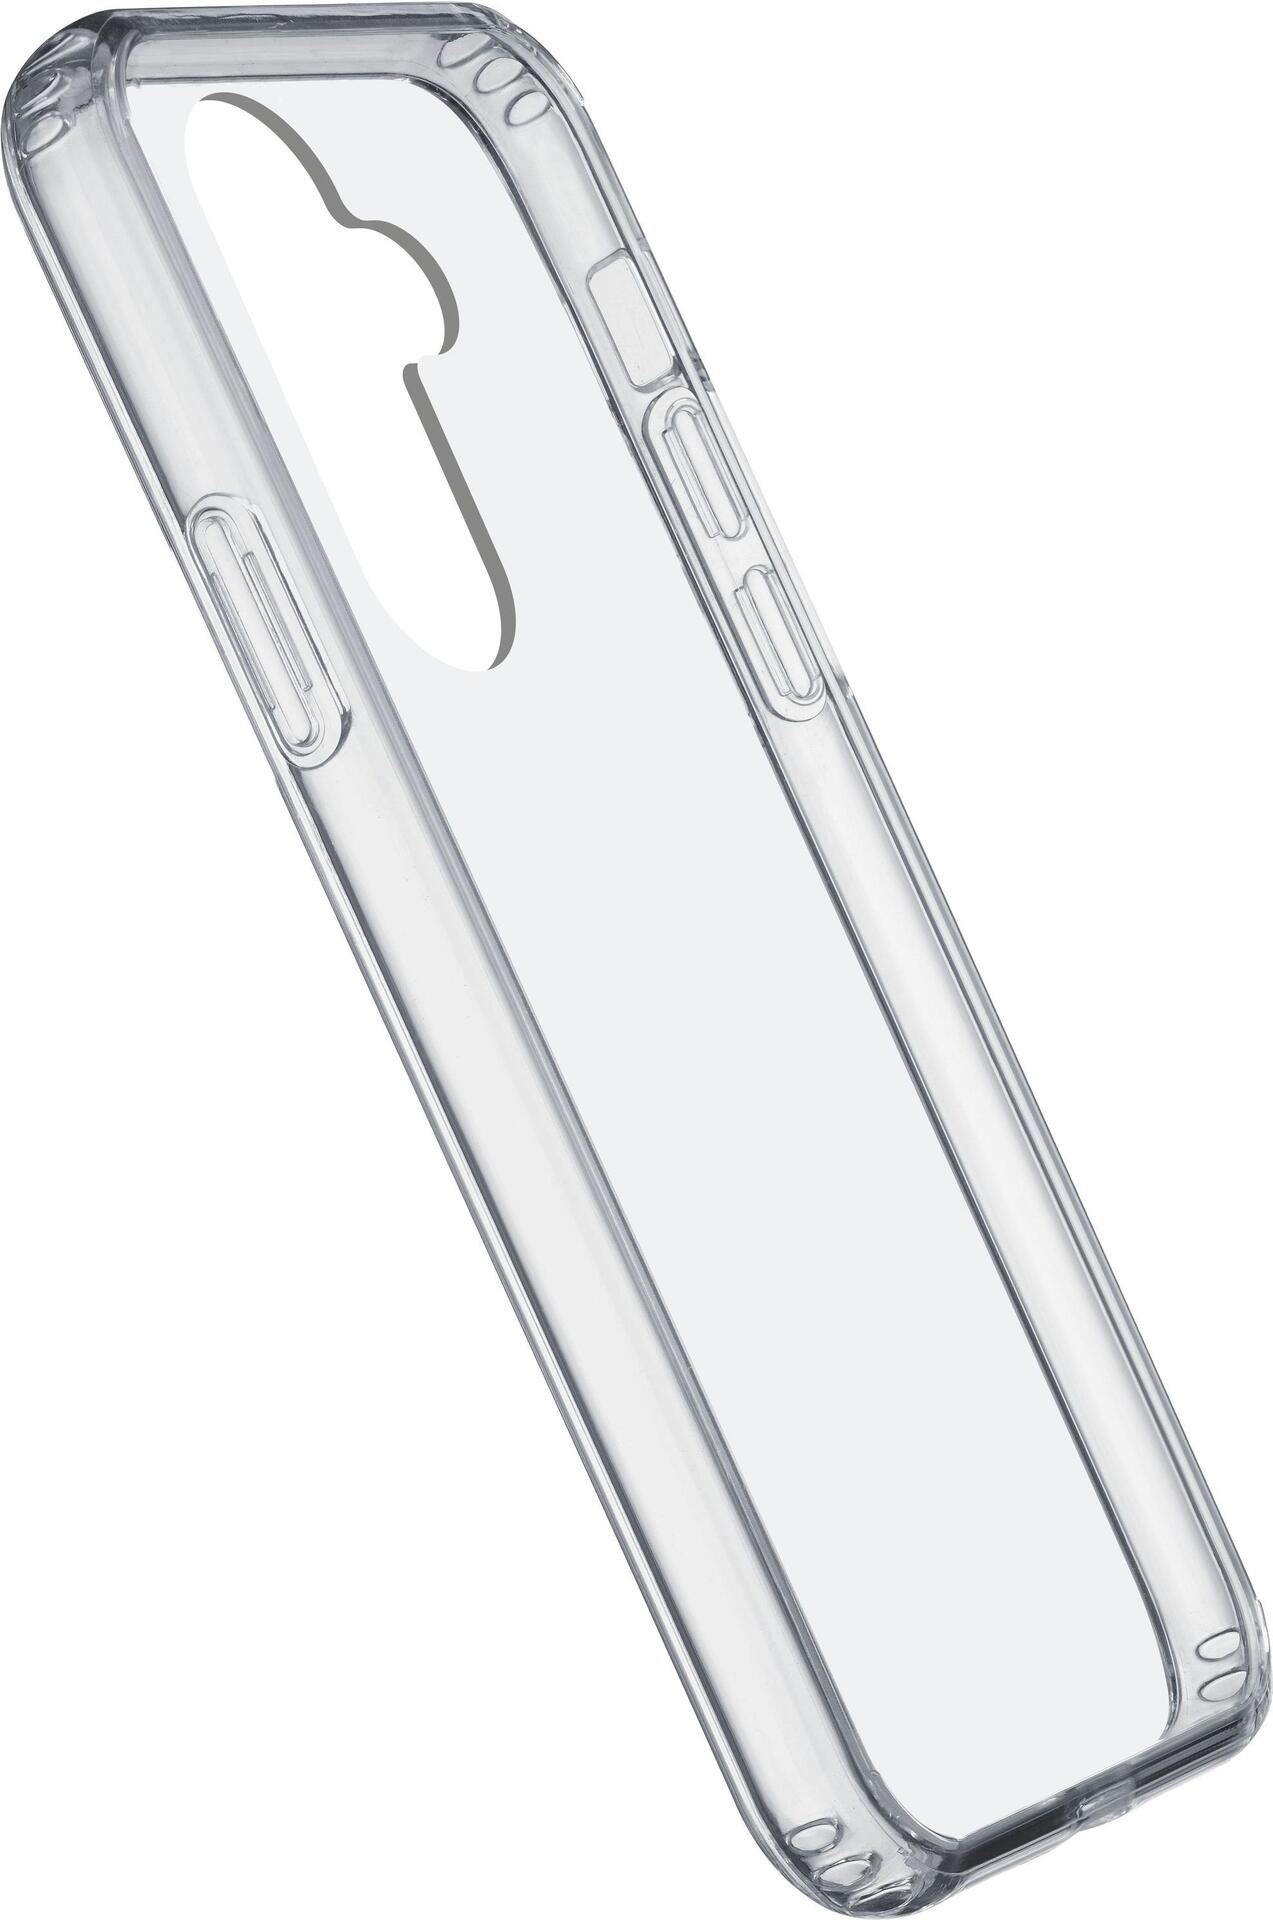 Cellularline Clear Strong – Galaxy A54 – Cover – Samsung – Galaxy A54 5G – 16,3 cm (6.4) – Transparent (CLEARDUOGALA54T)